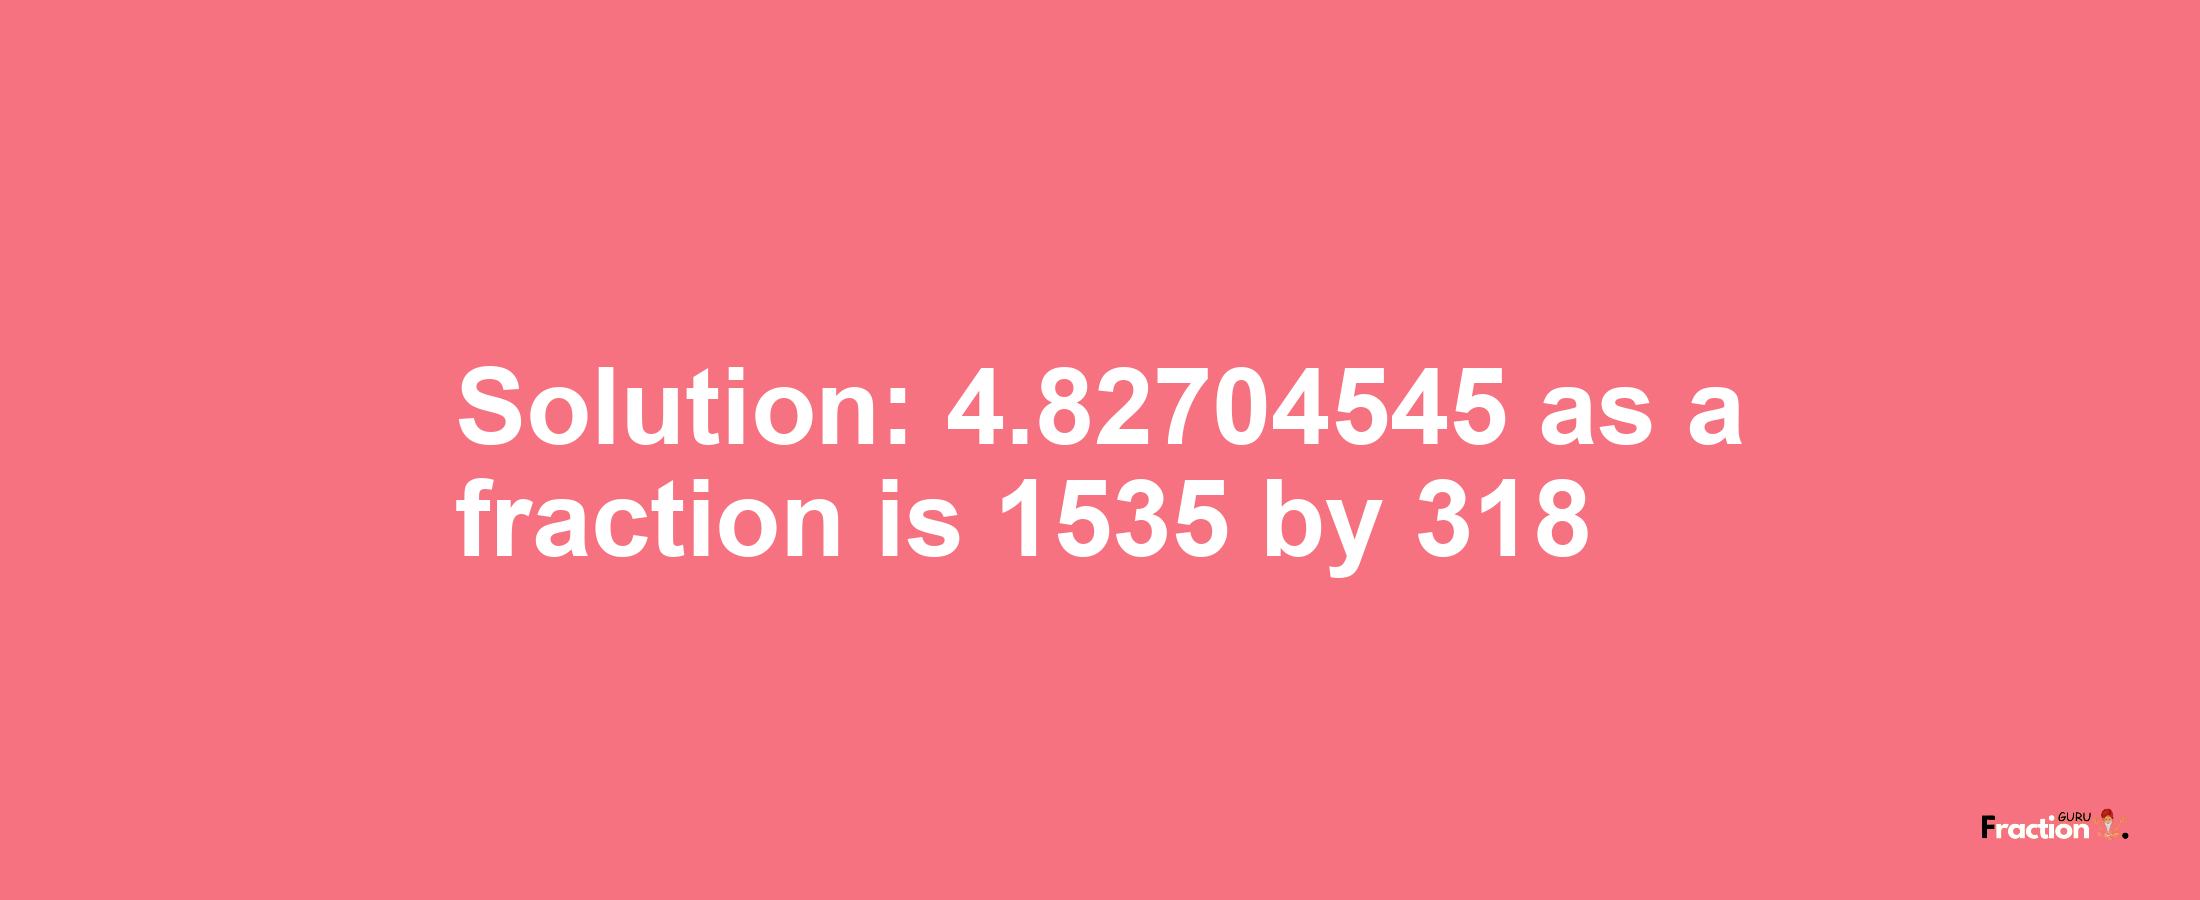 Solution:4.82704545 as a fraction is 1535/318